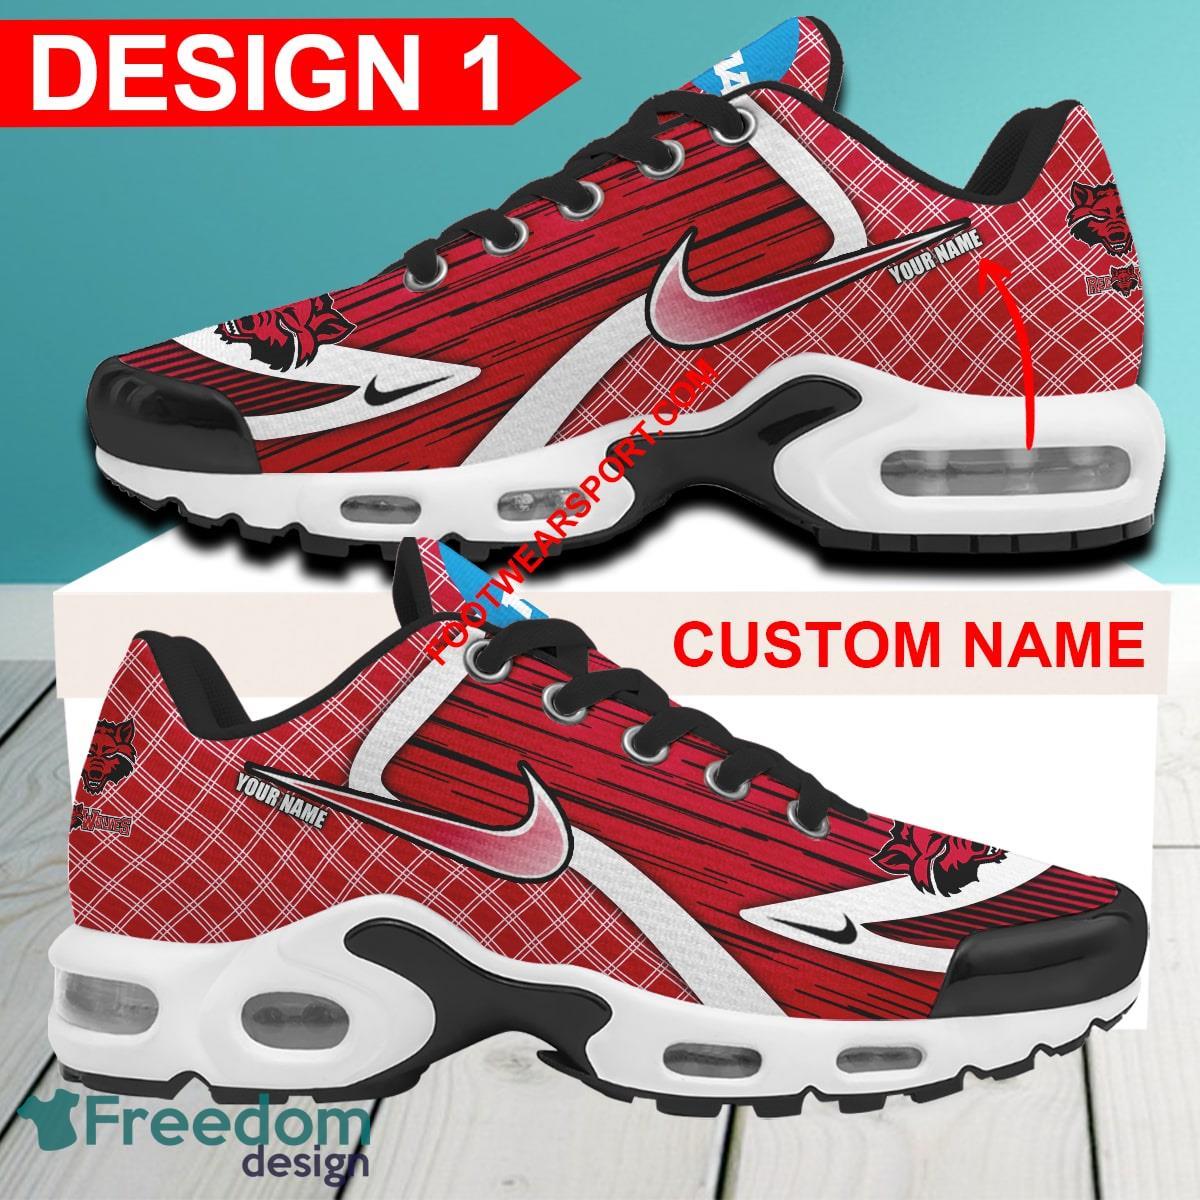 Custom Name NCAA Arkansas State Red Wolves Air Cushion Sport Shoes TN Sneakers Gift Sneakers Fans - NCAA Arkansas State Red Wolves Air Cushion Sport Shoes Style 1 TN Sneakers